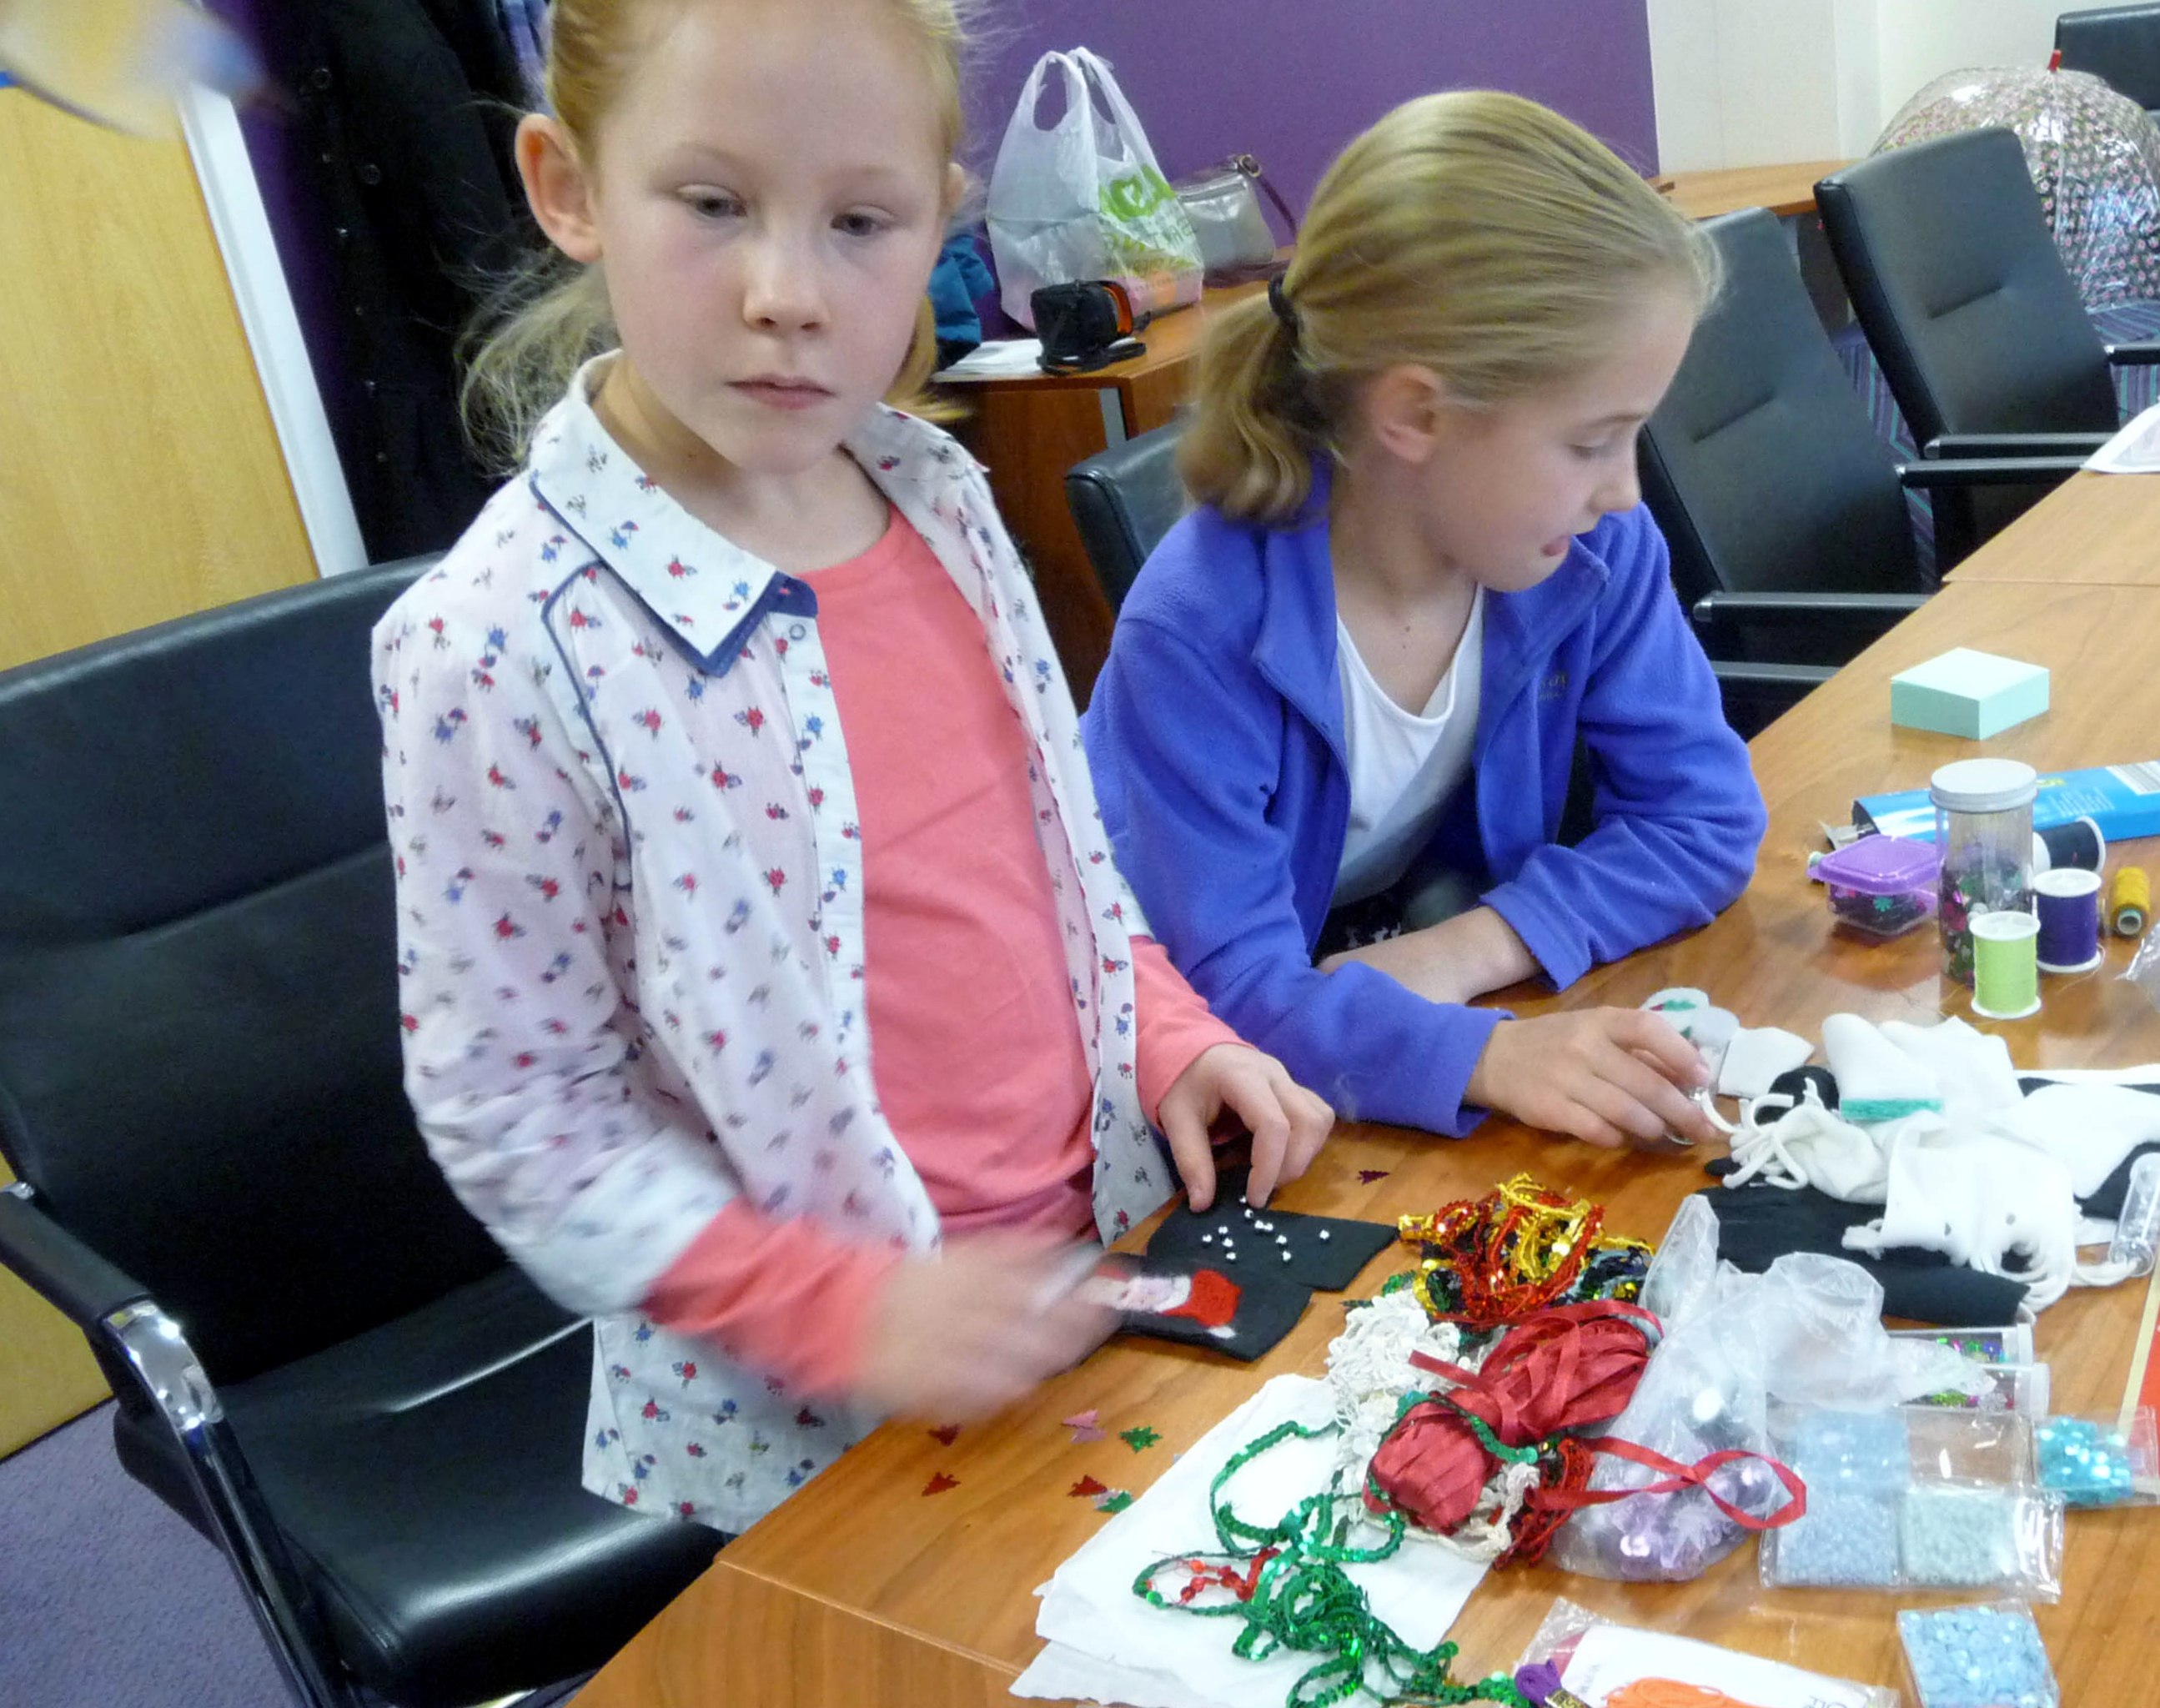 Zoe and Emma are choosing some embellishments for their needle-felted Christmas stockings